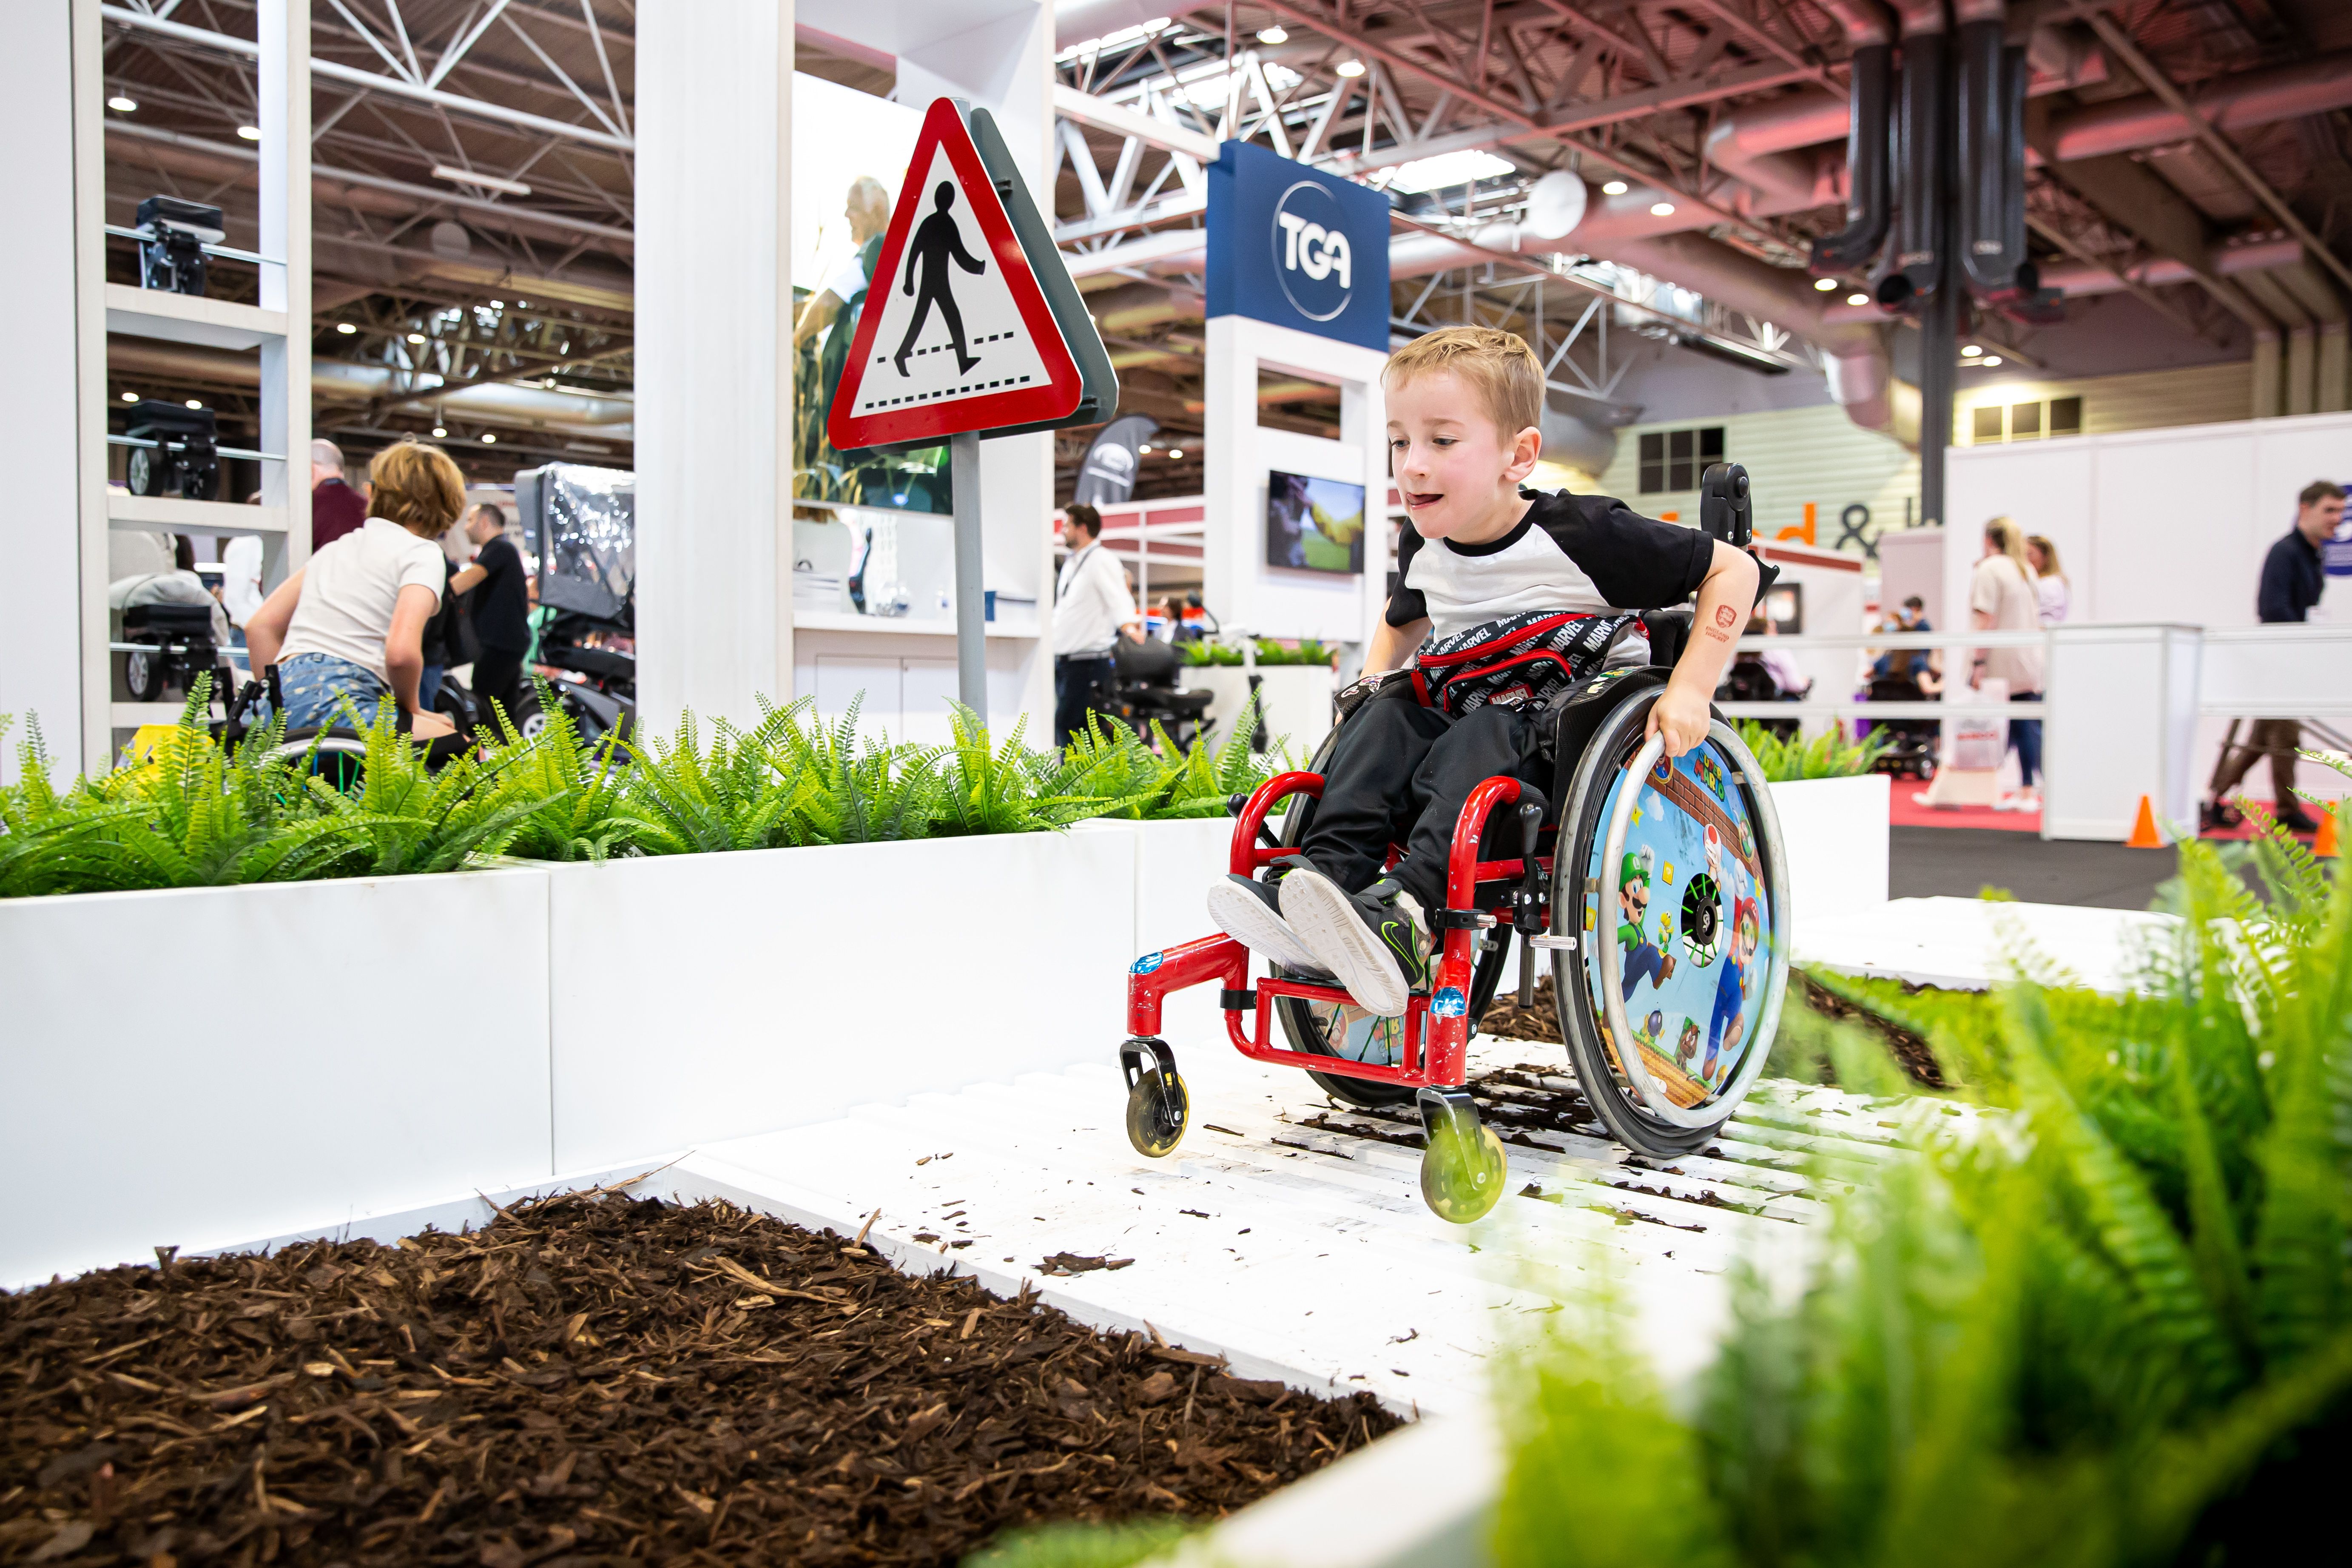 Naidex visitor having fun testing out wheelchair on the track